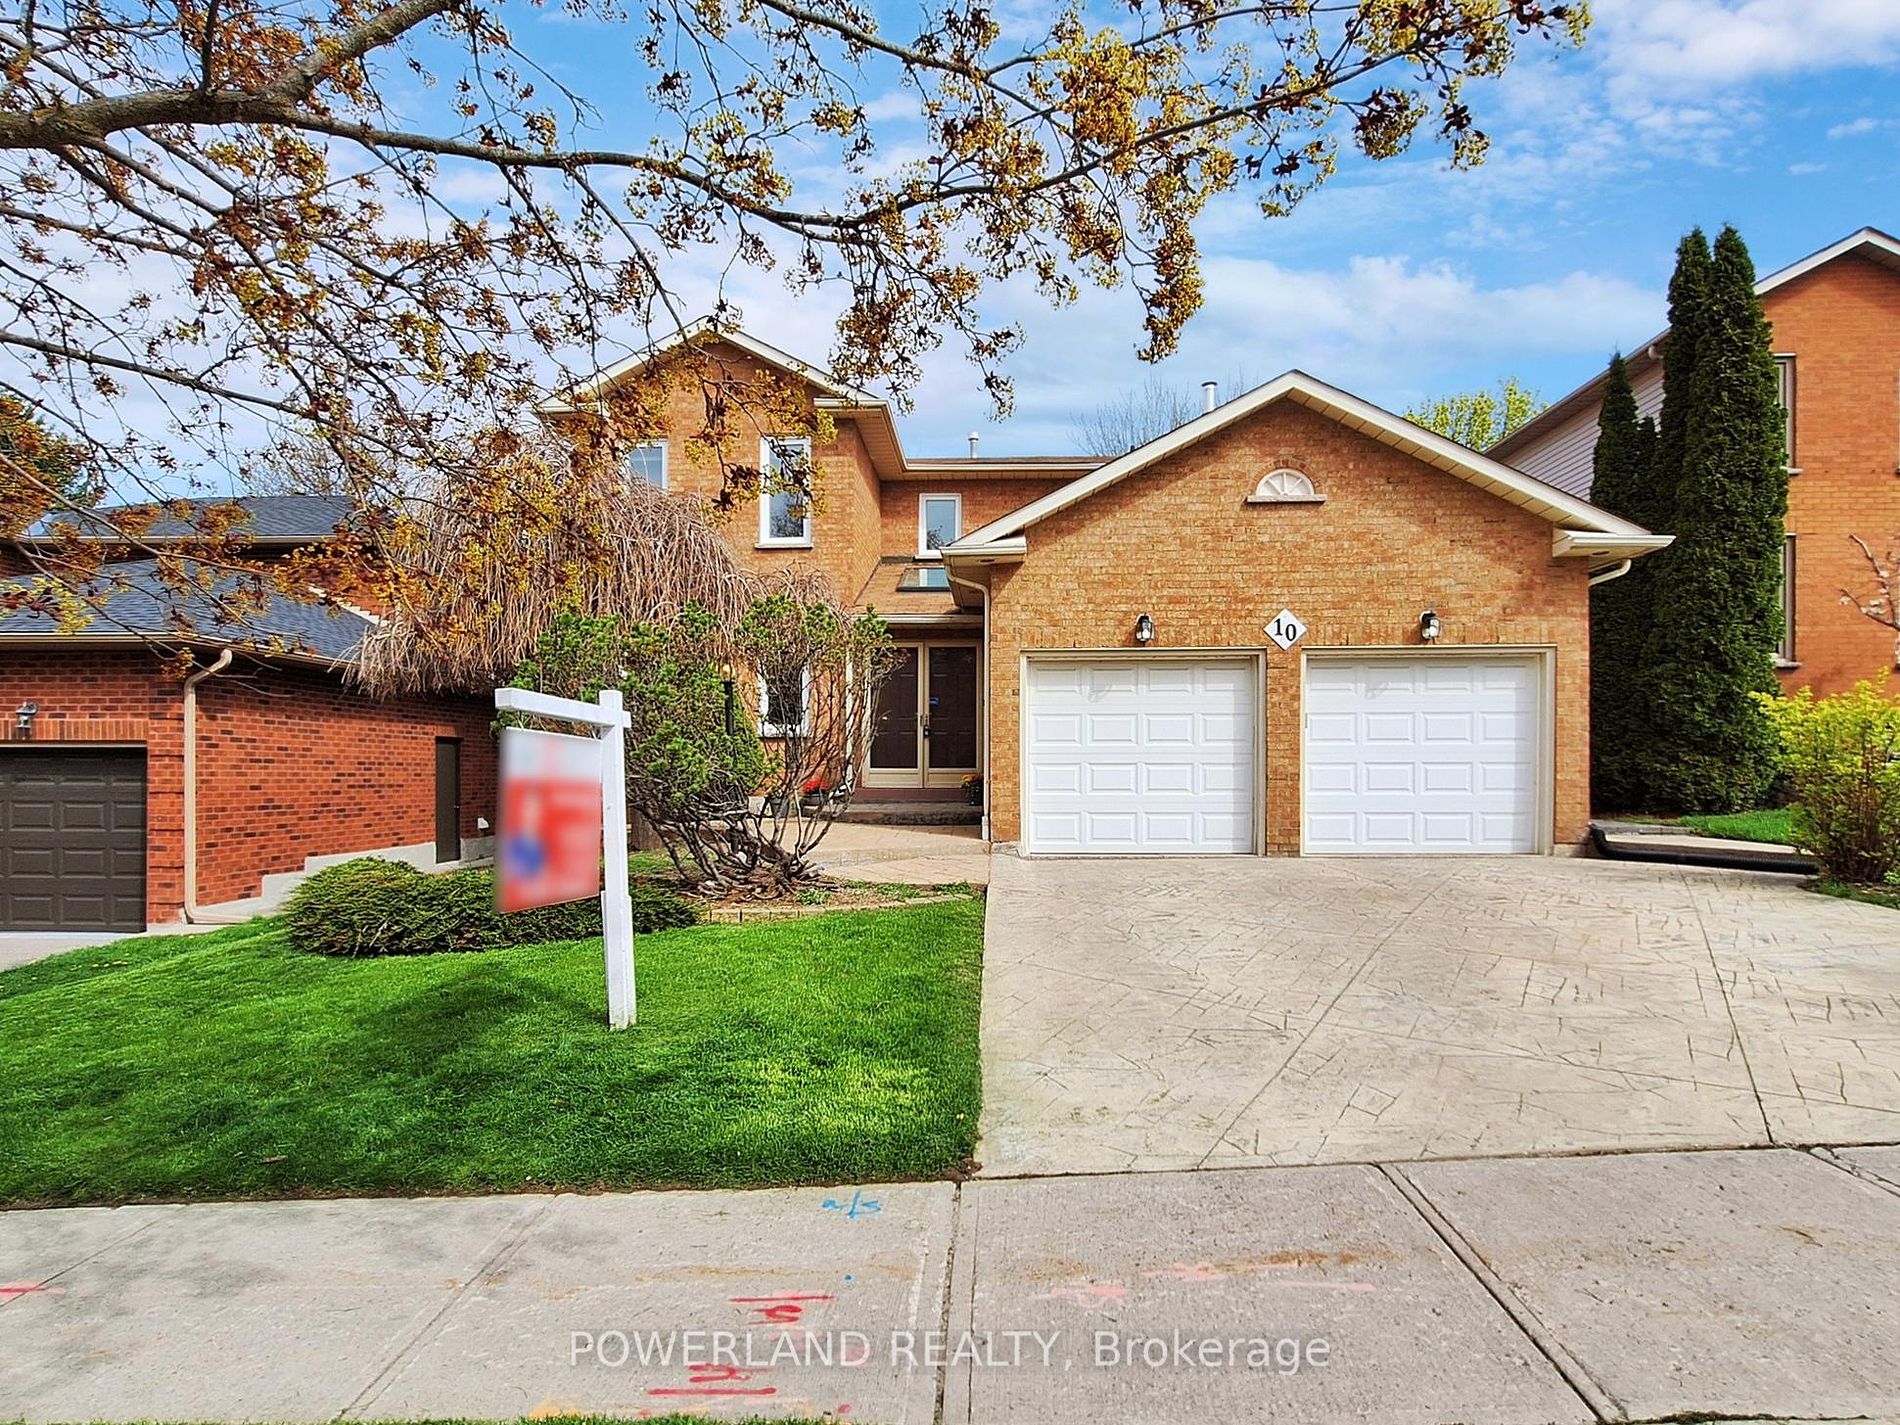 Detached house for sale at 10 Raiford St Aurora Ontario